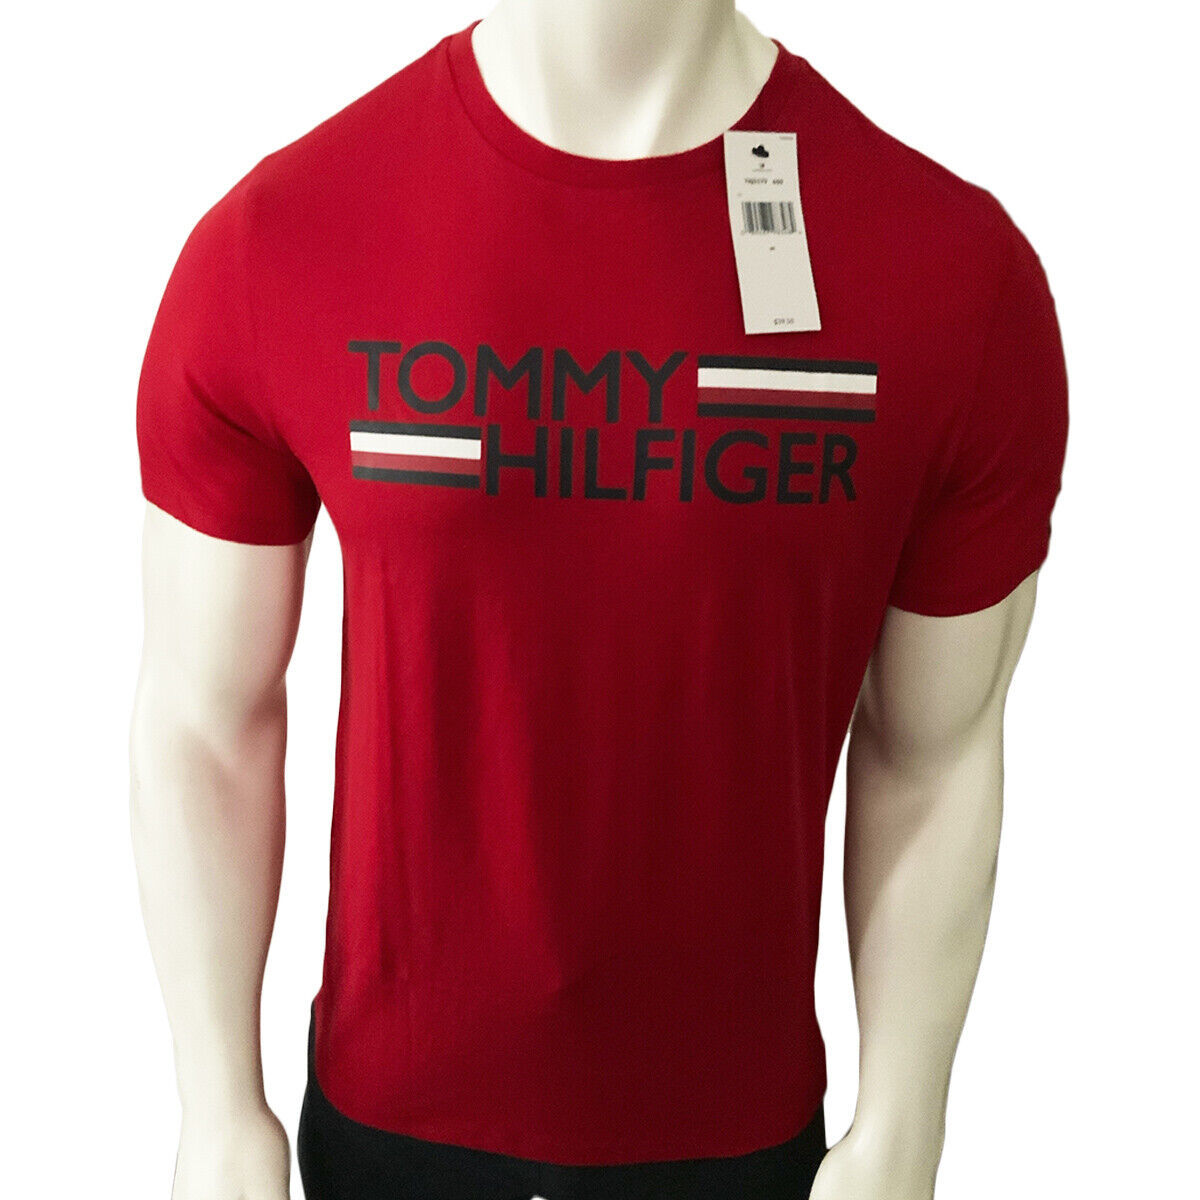 Primary image for NWT TOMMY HILFIGER MSRP $41.99 MEN'S RED JERSEY CREW NECK SHORT SLEEVE T-SHIRT